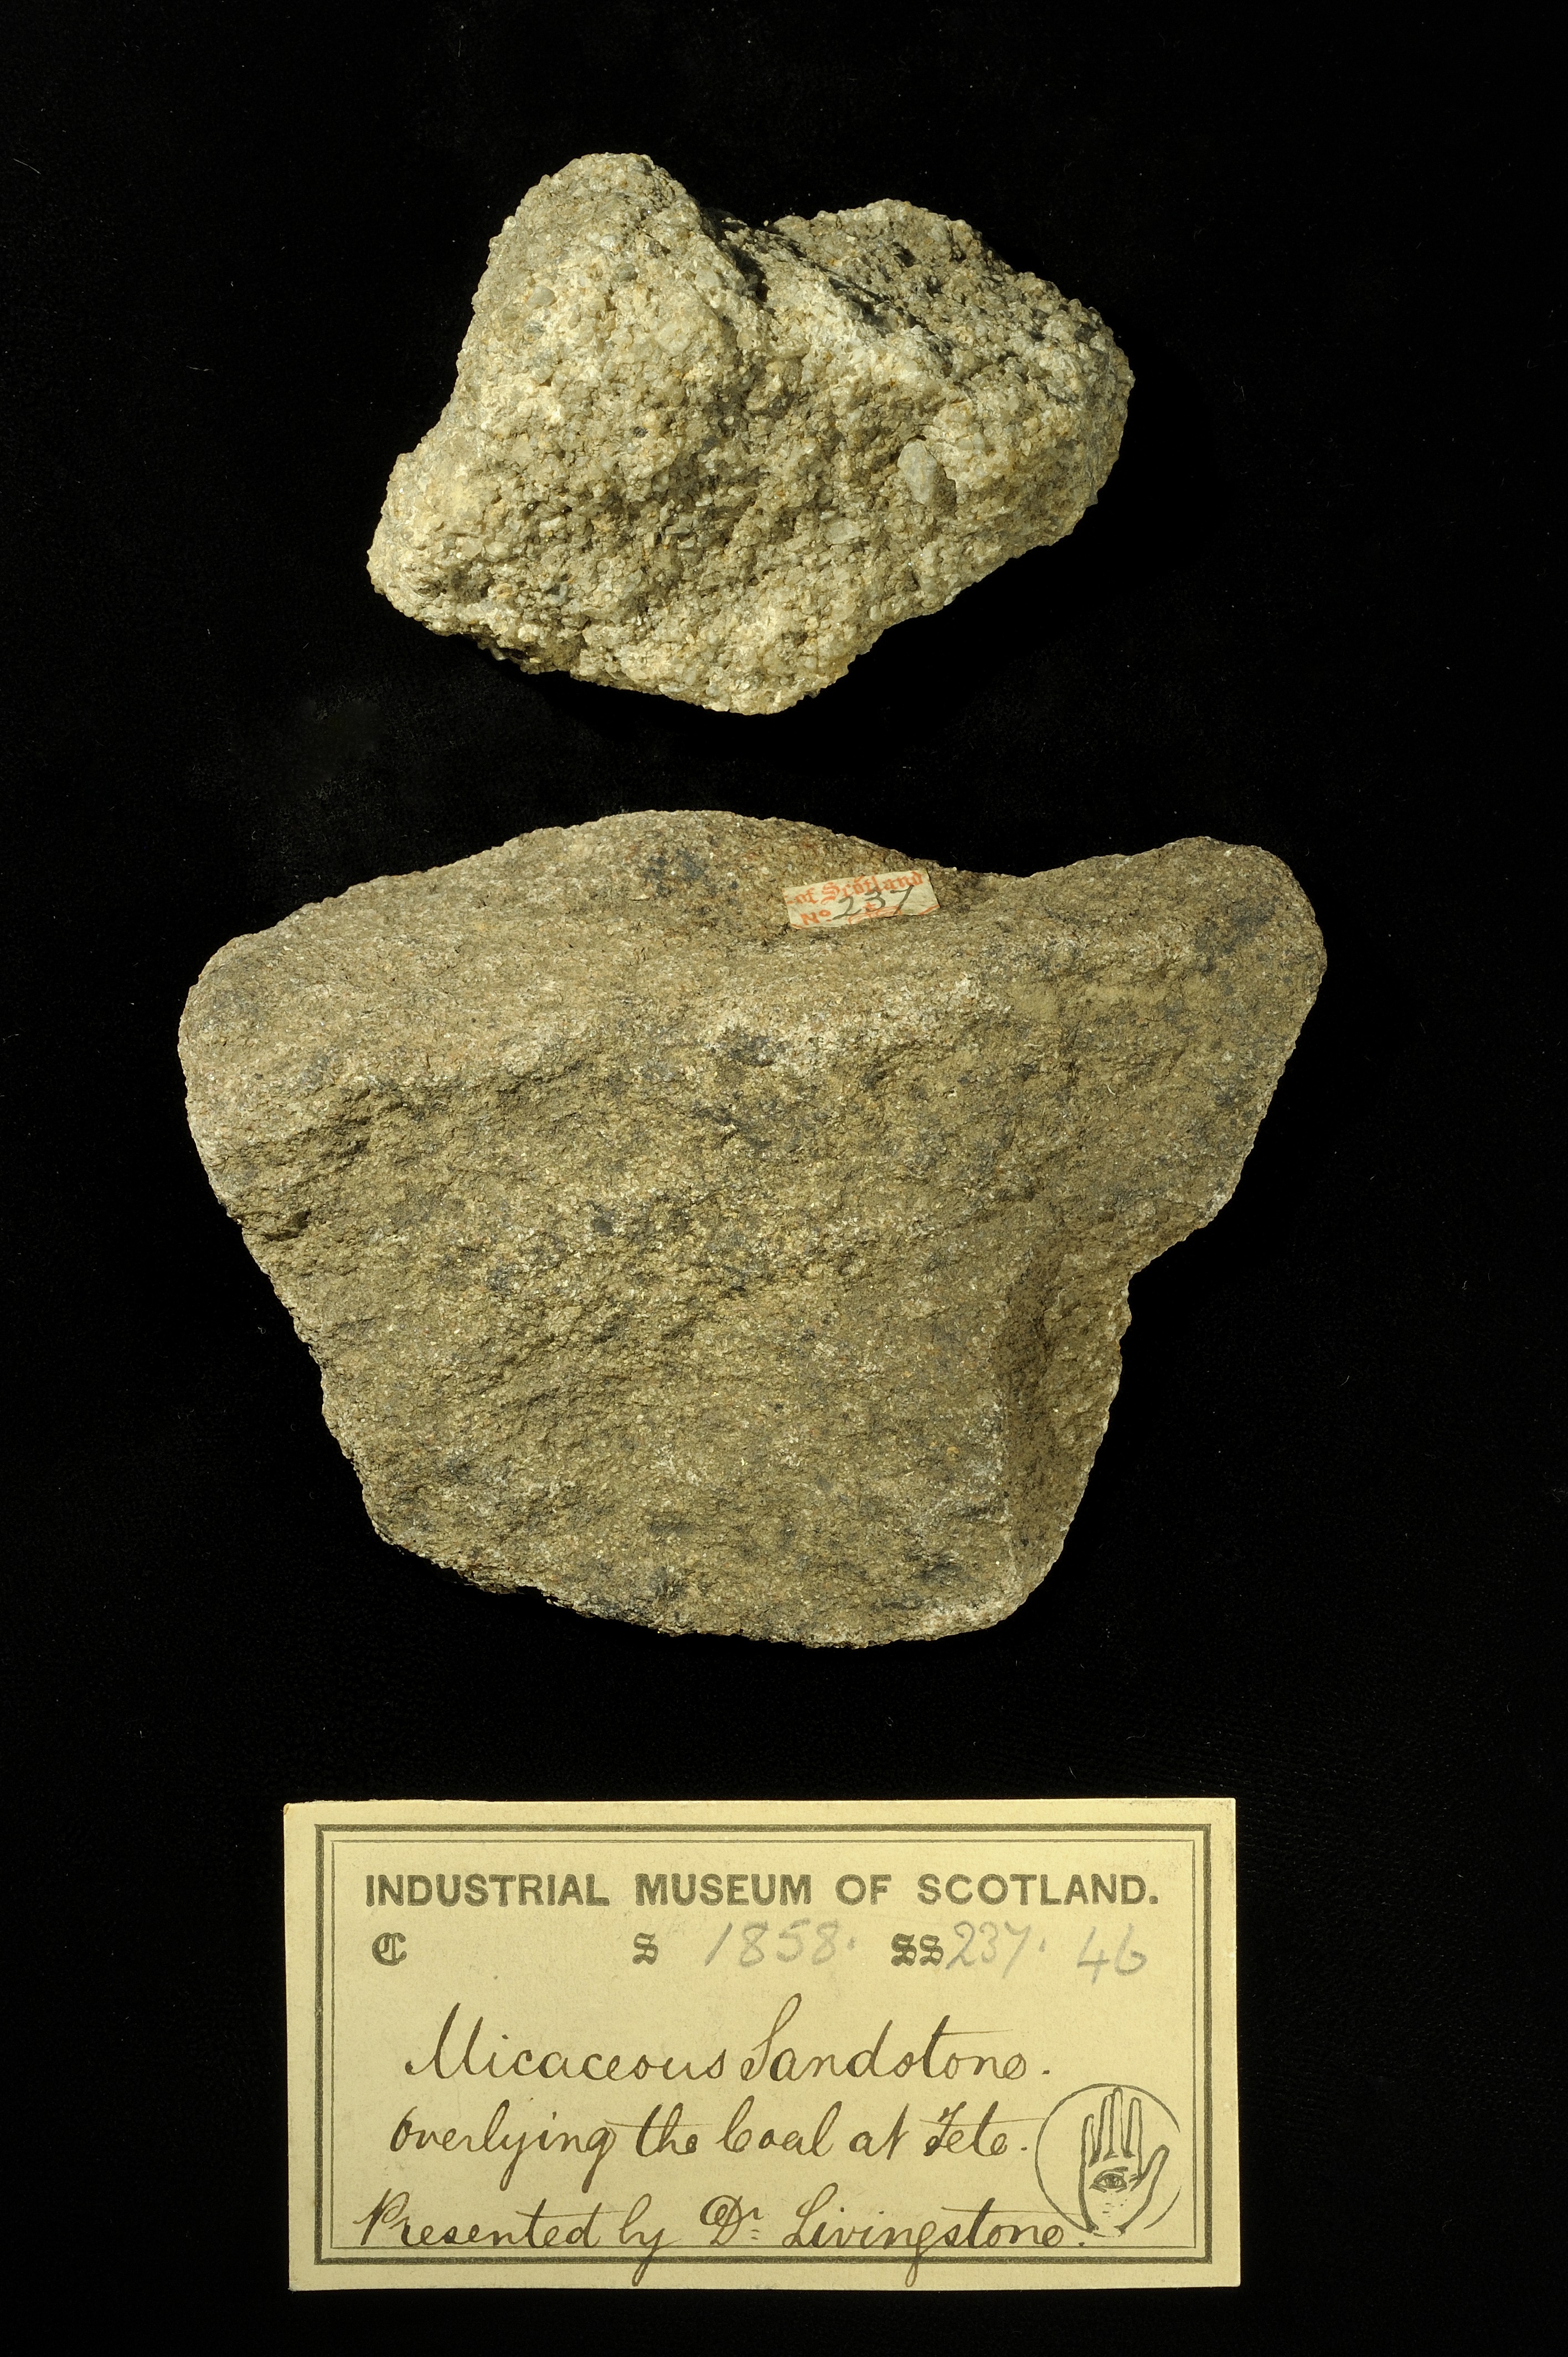 Specimen of micaceous sandstone with 19th century museum label: ‘Micaceous sandstone. Overlying the coal at Tete. Presented by Dr Livingstone.’